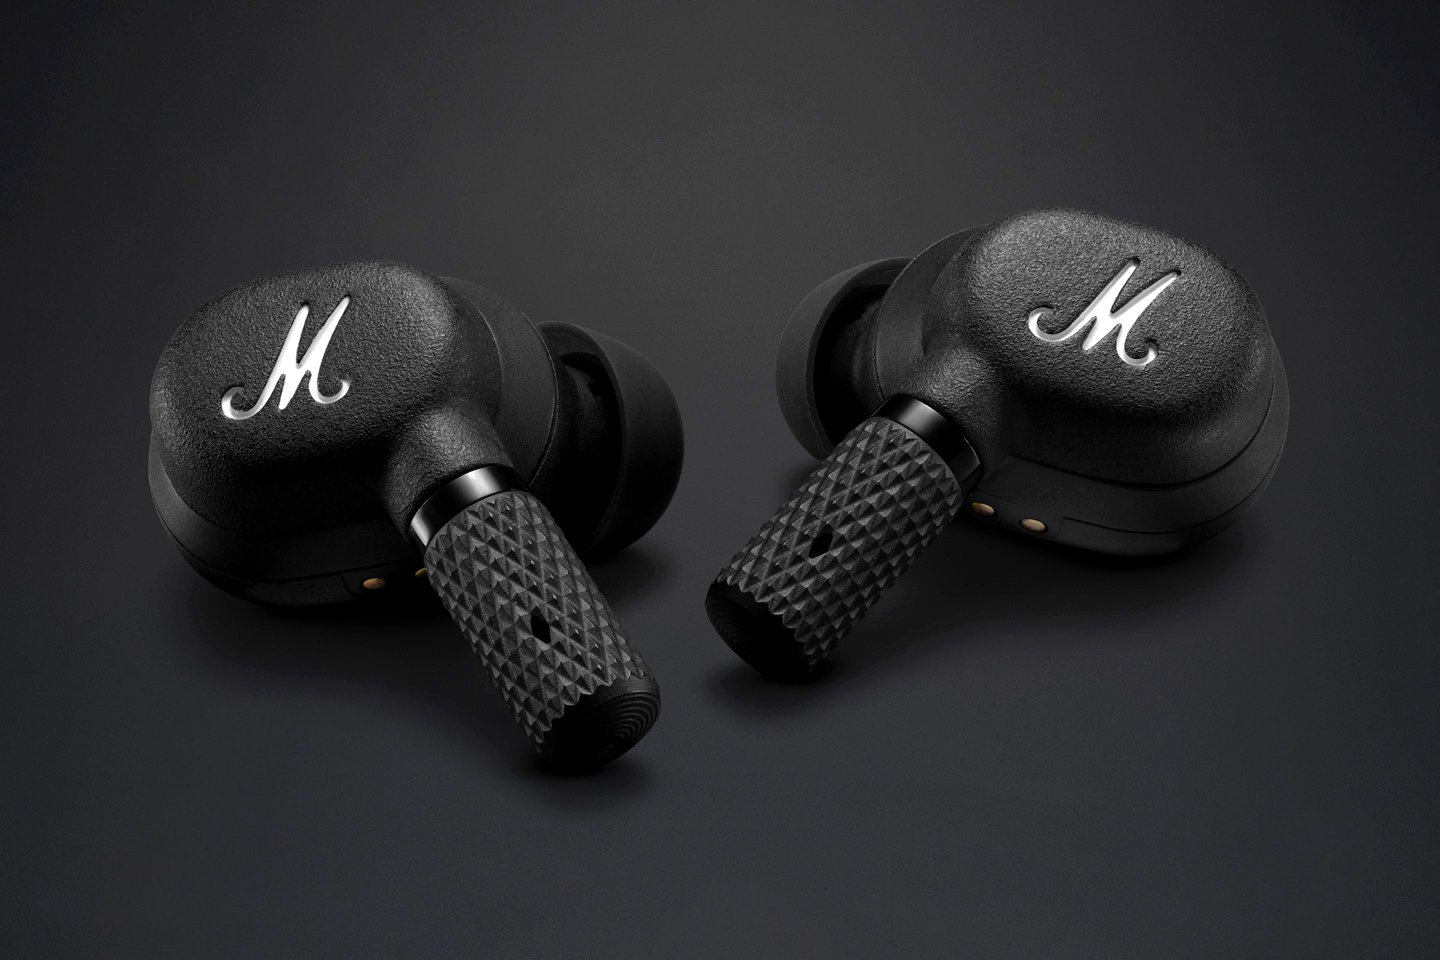 Marshall's new ANC earphones are straight-up designed for absolute